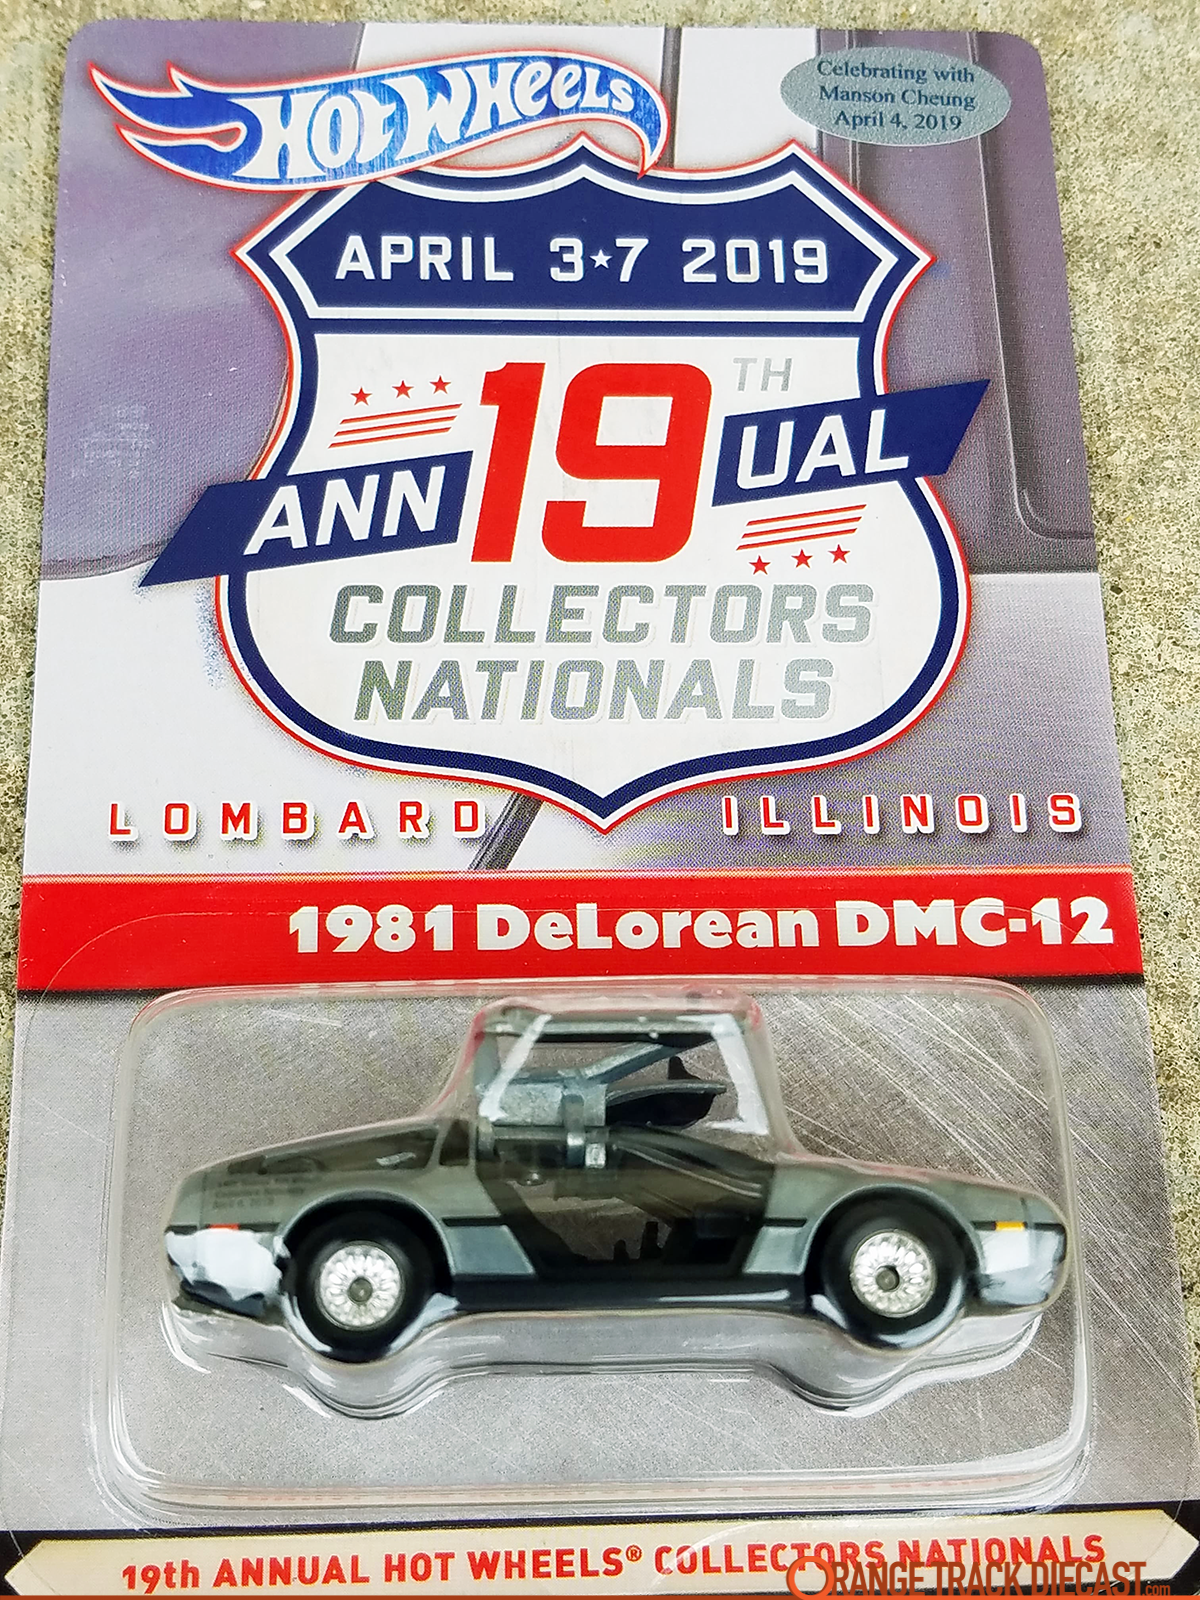 hot wheels convention 2019 tickets